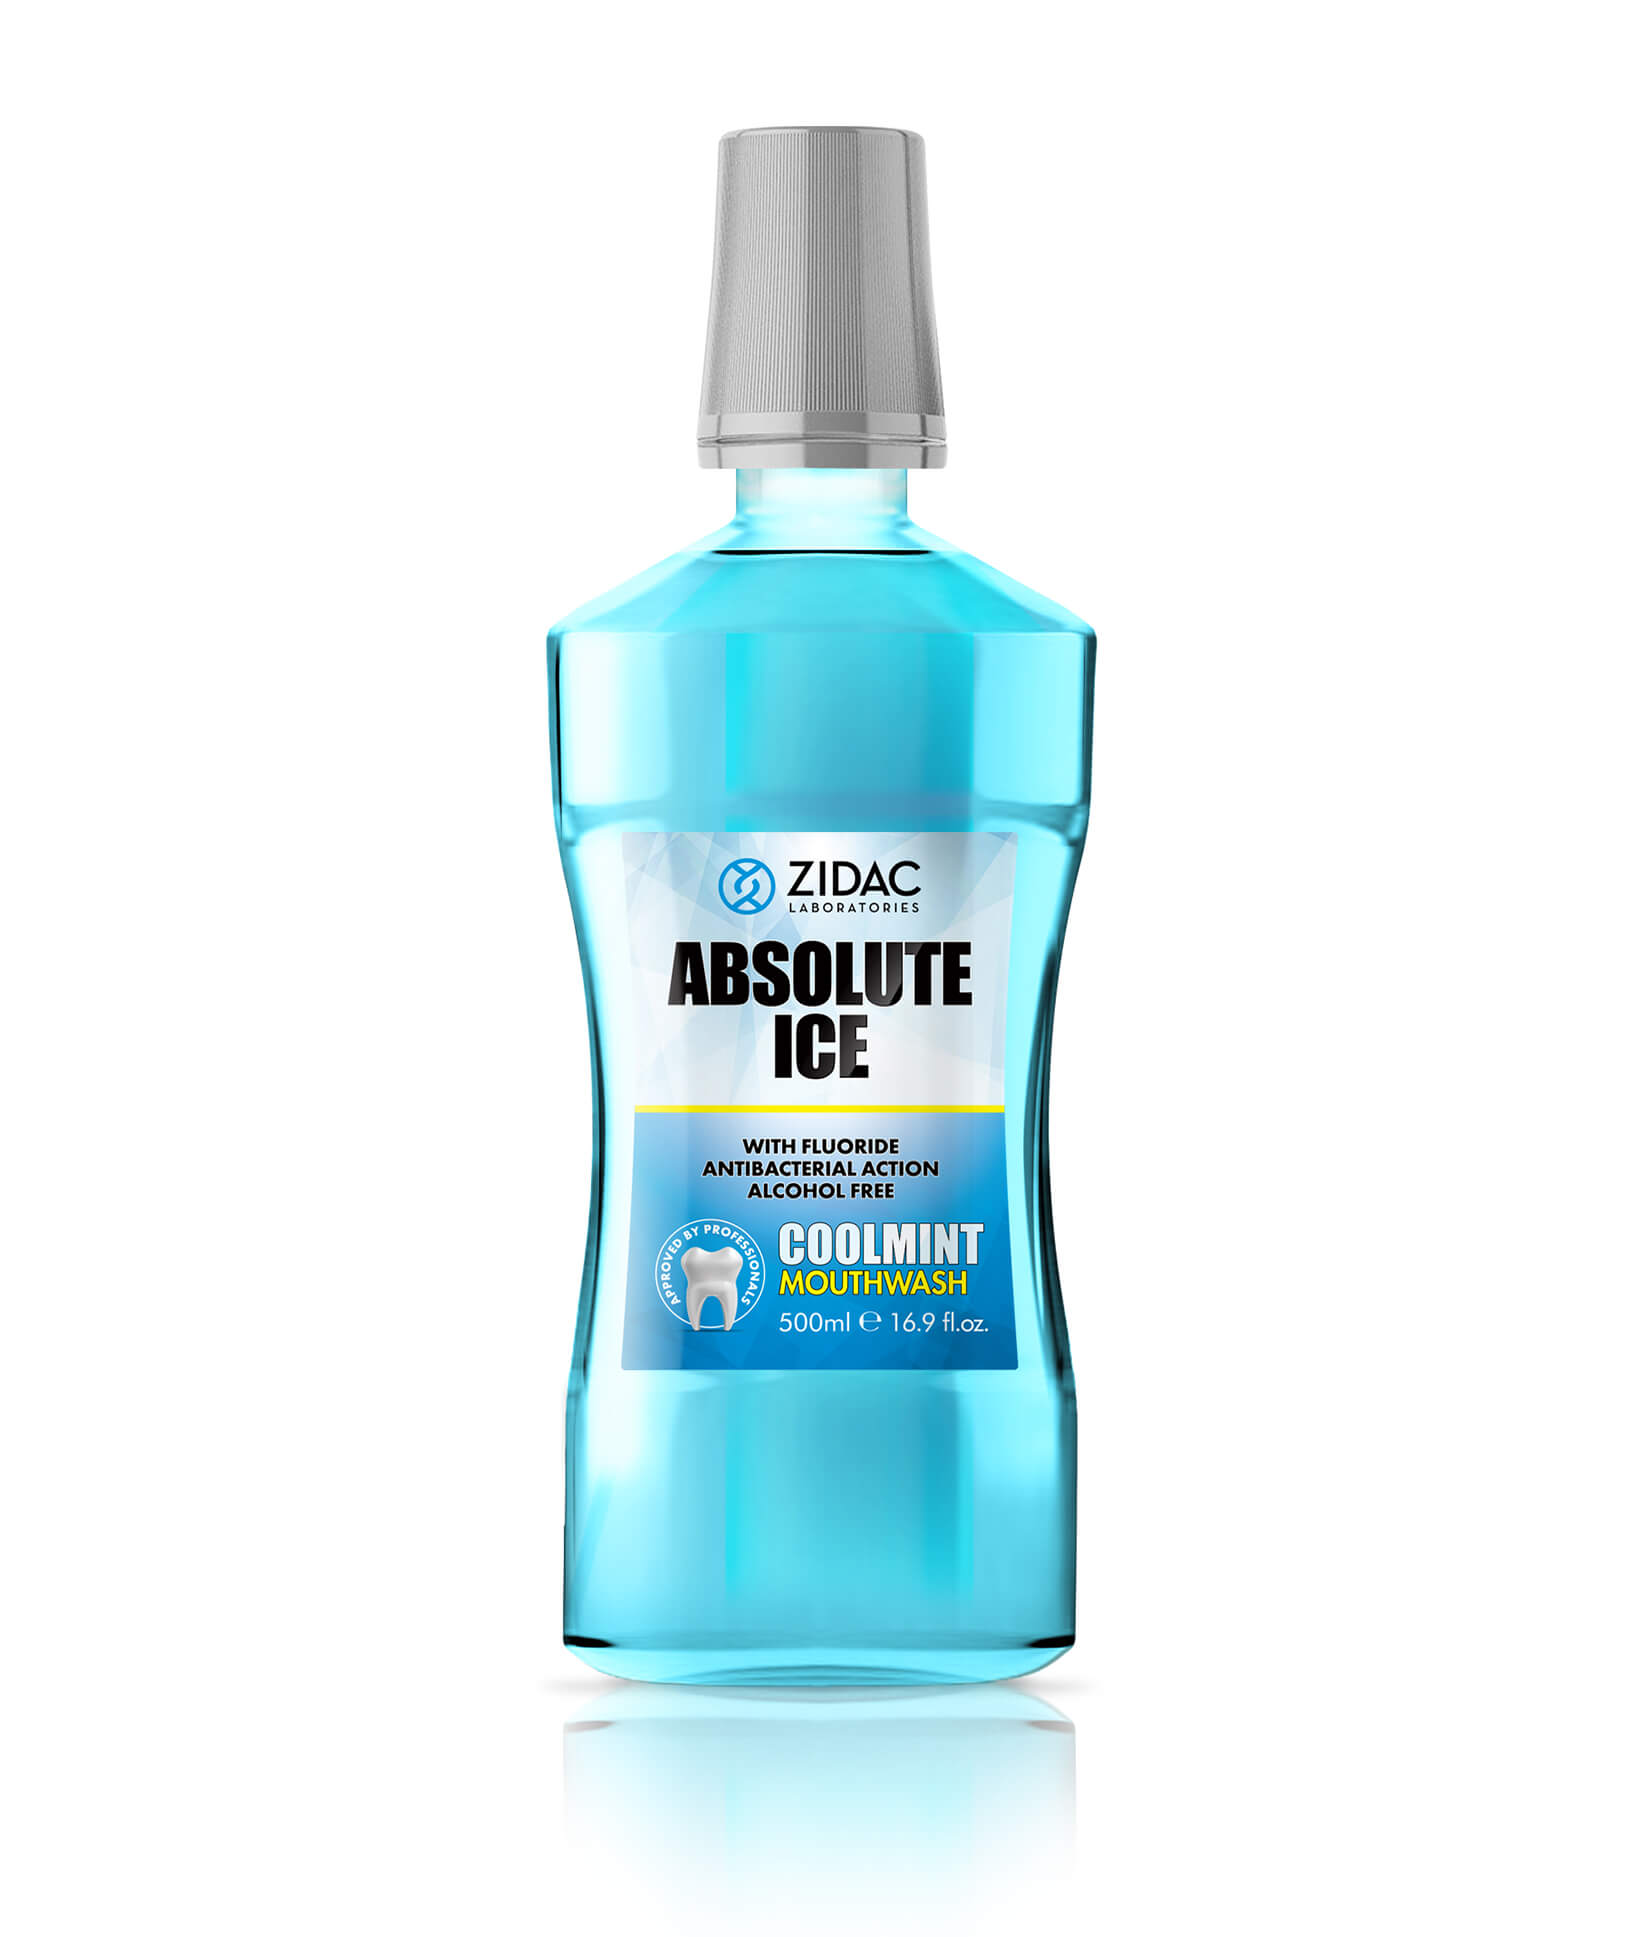 Absolute Ice Coolmint Mouthwash | Zidac